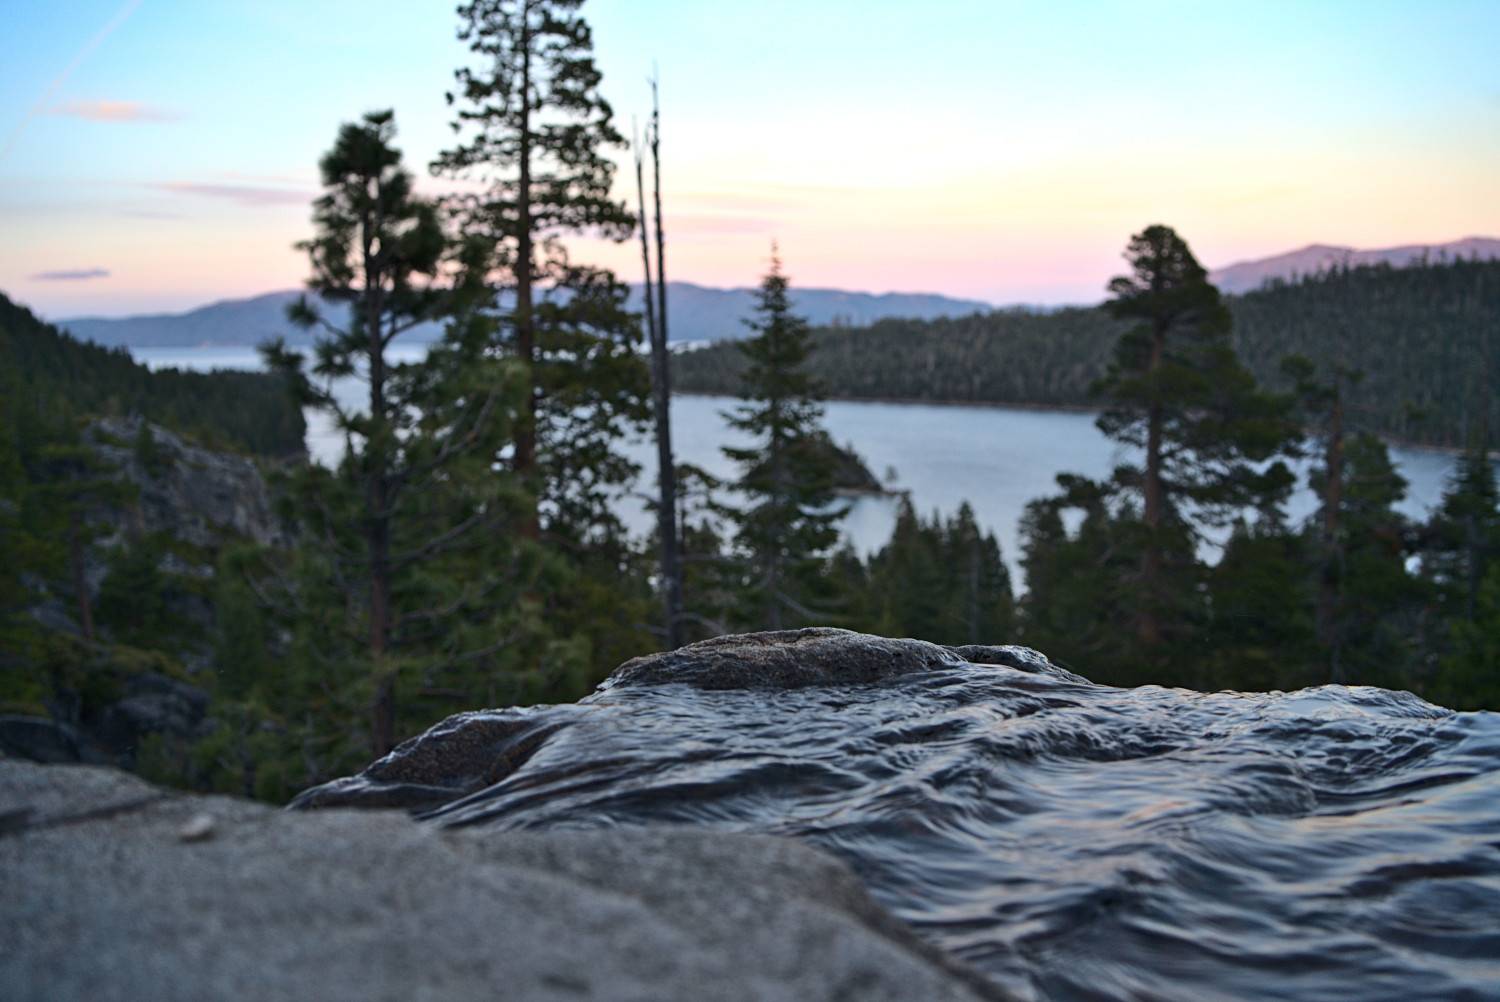 View of Emerald Bay from the waterfall